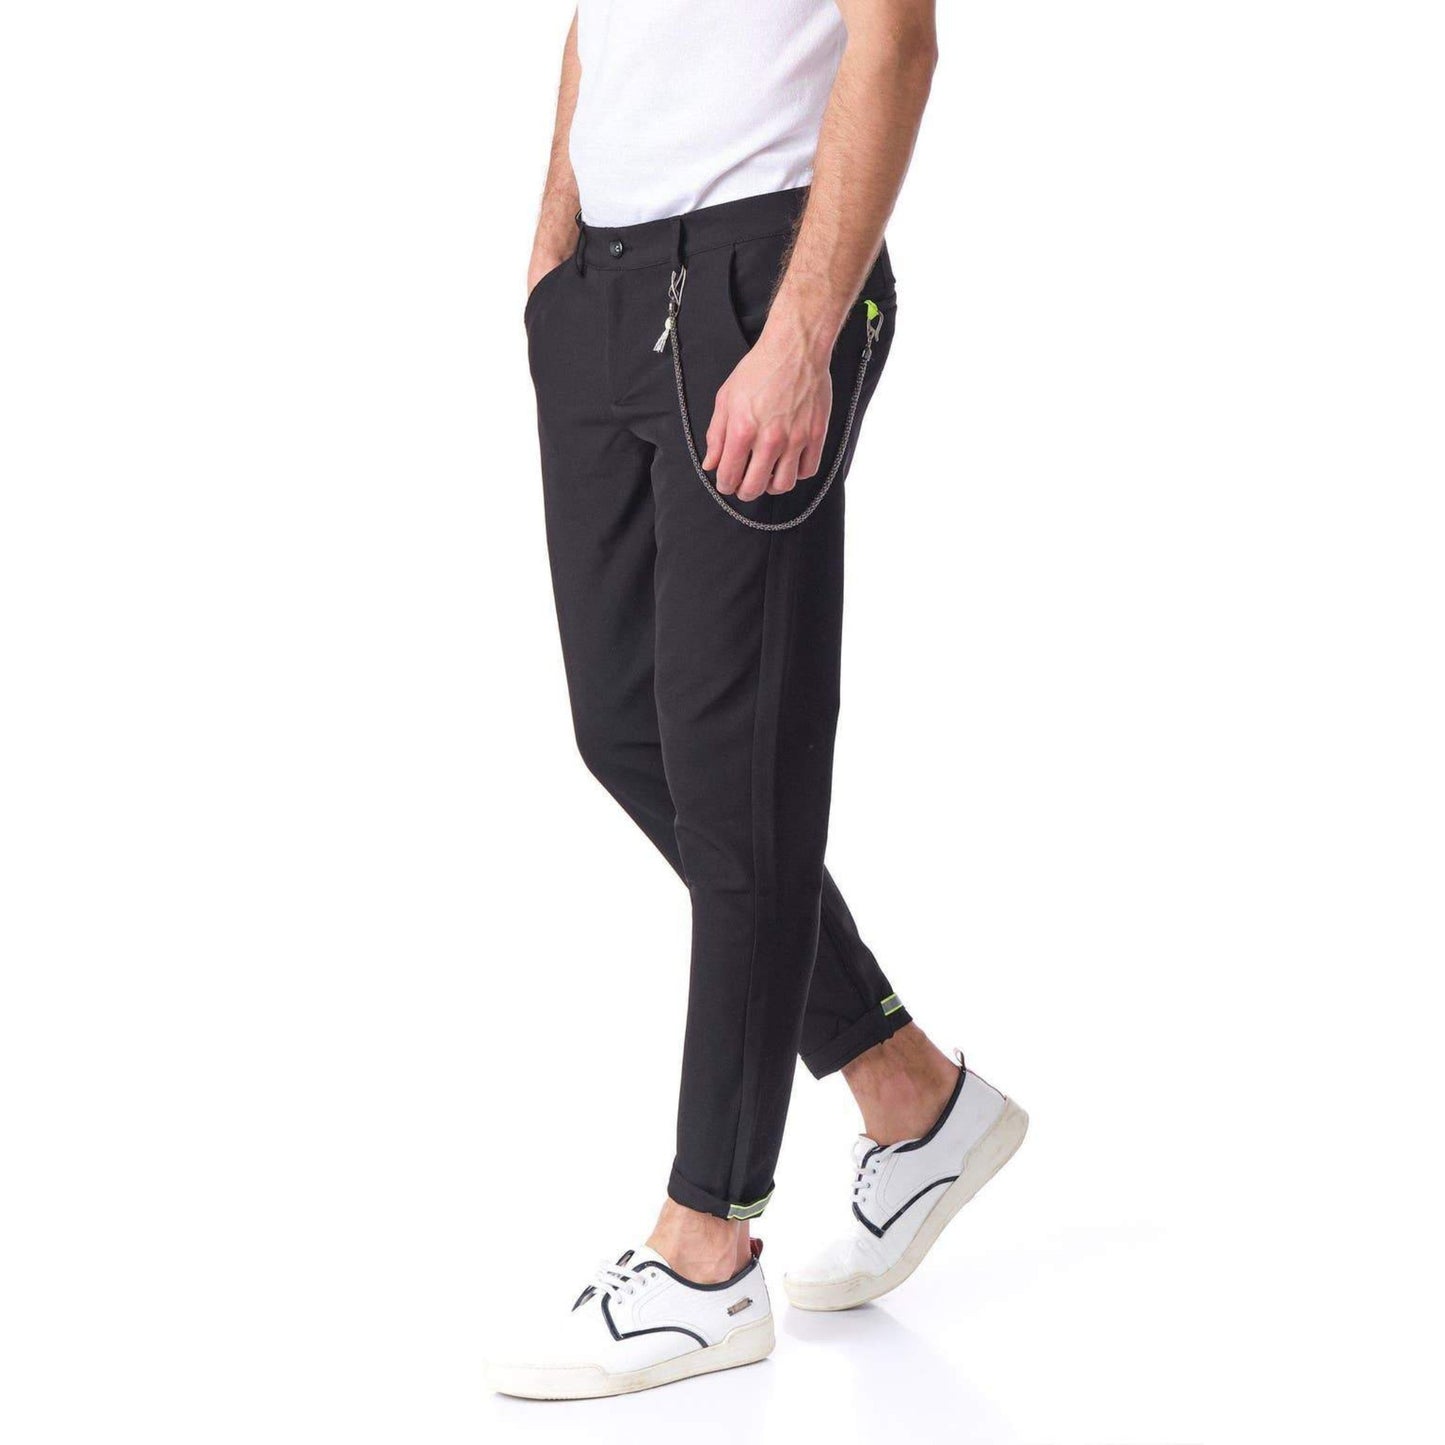 RON TOMSON French Quarter Casual Trousers